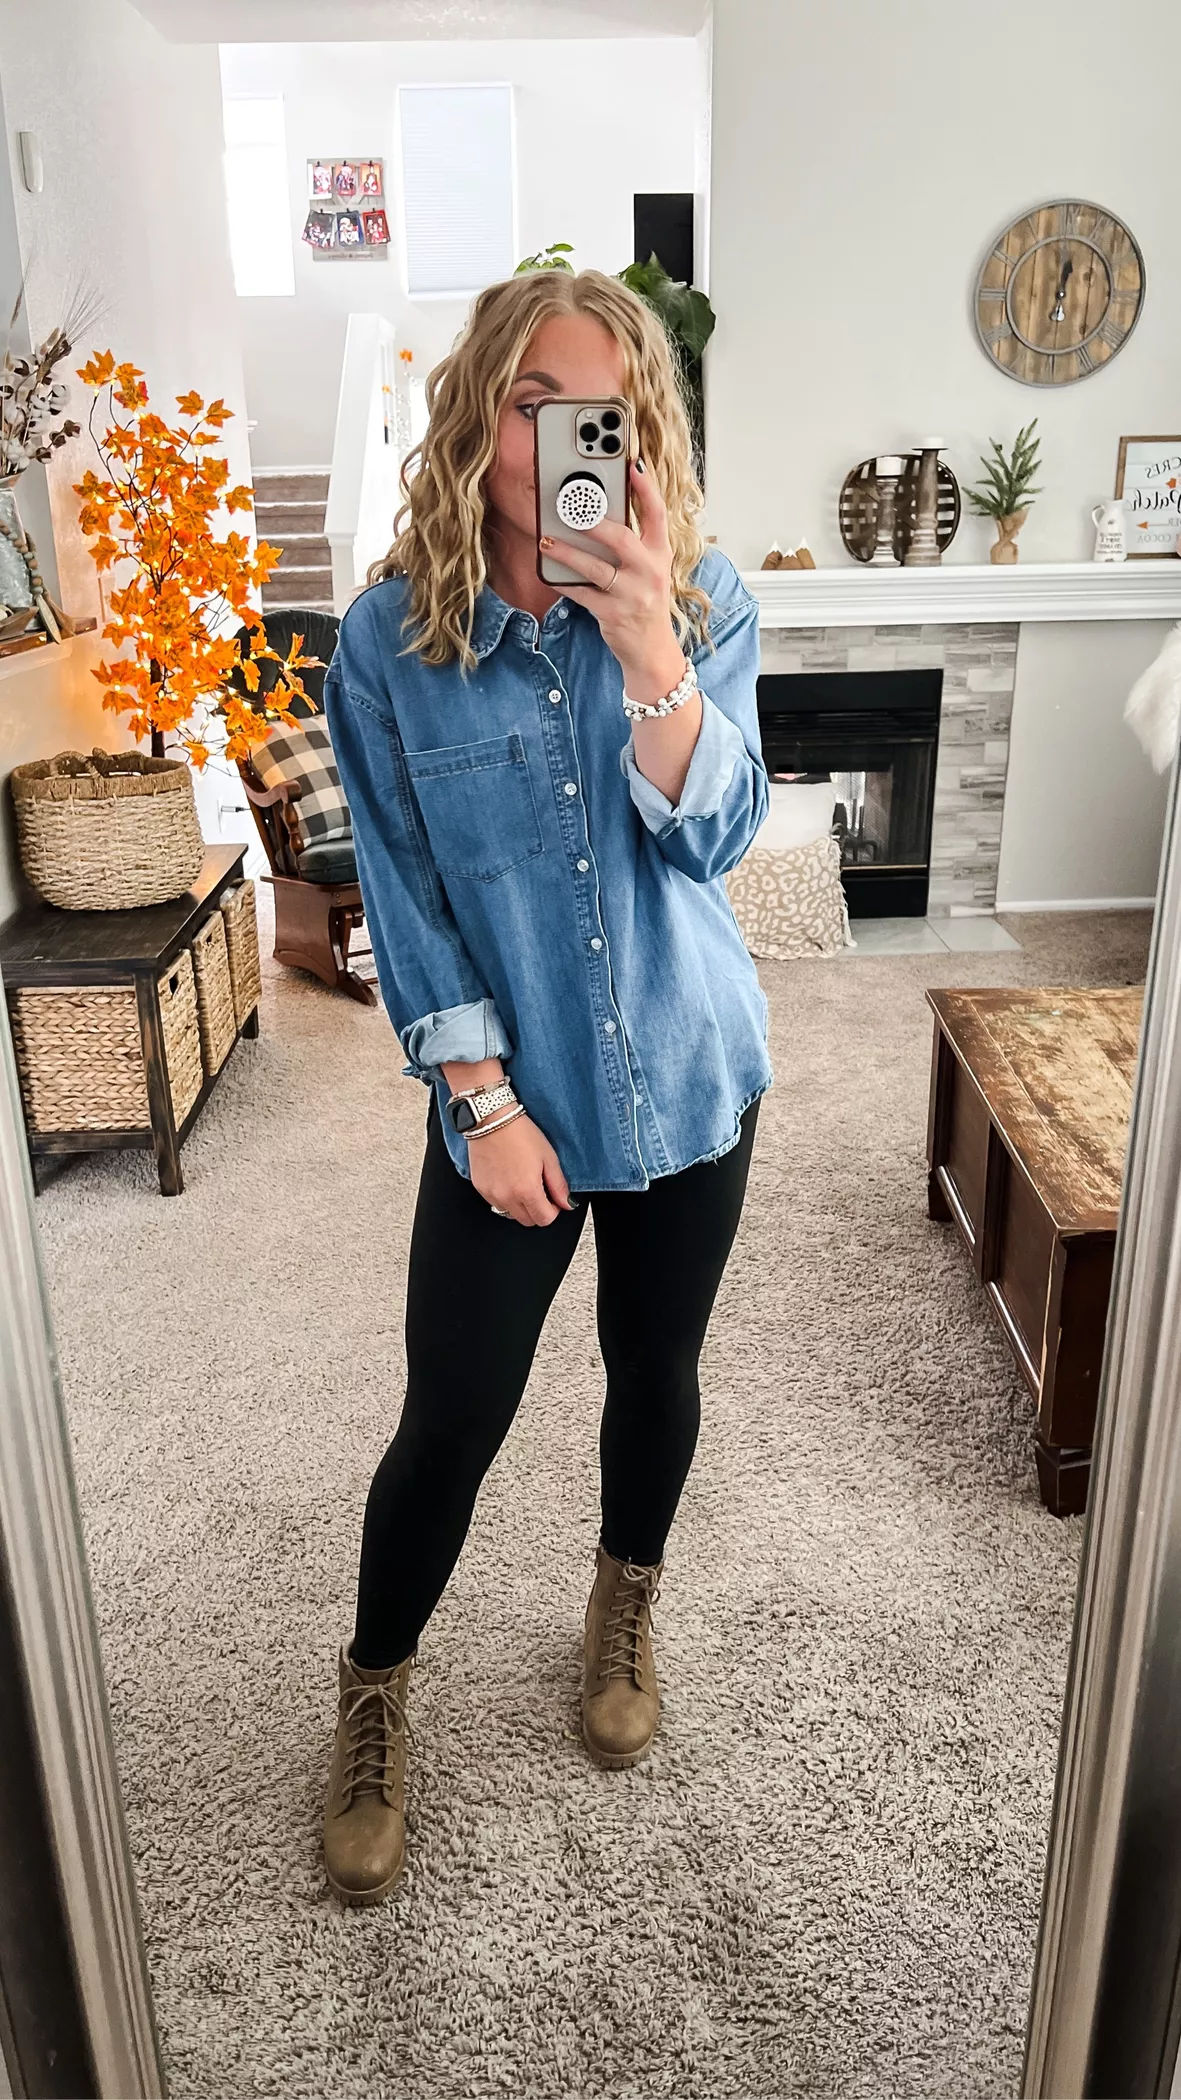 Casual Fall Fashion: Sneakers, Hat, and Denim Jacket